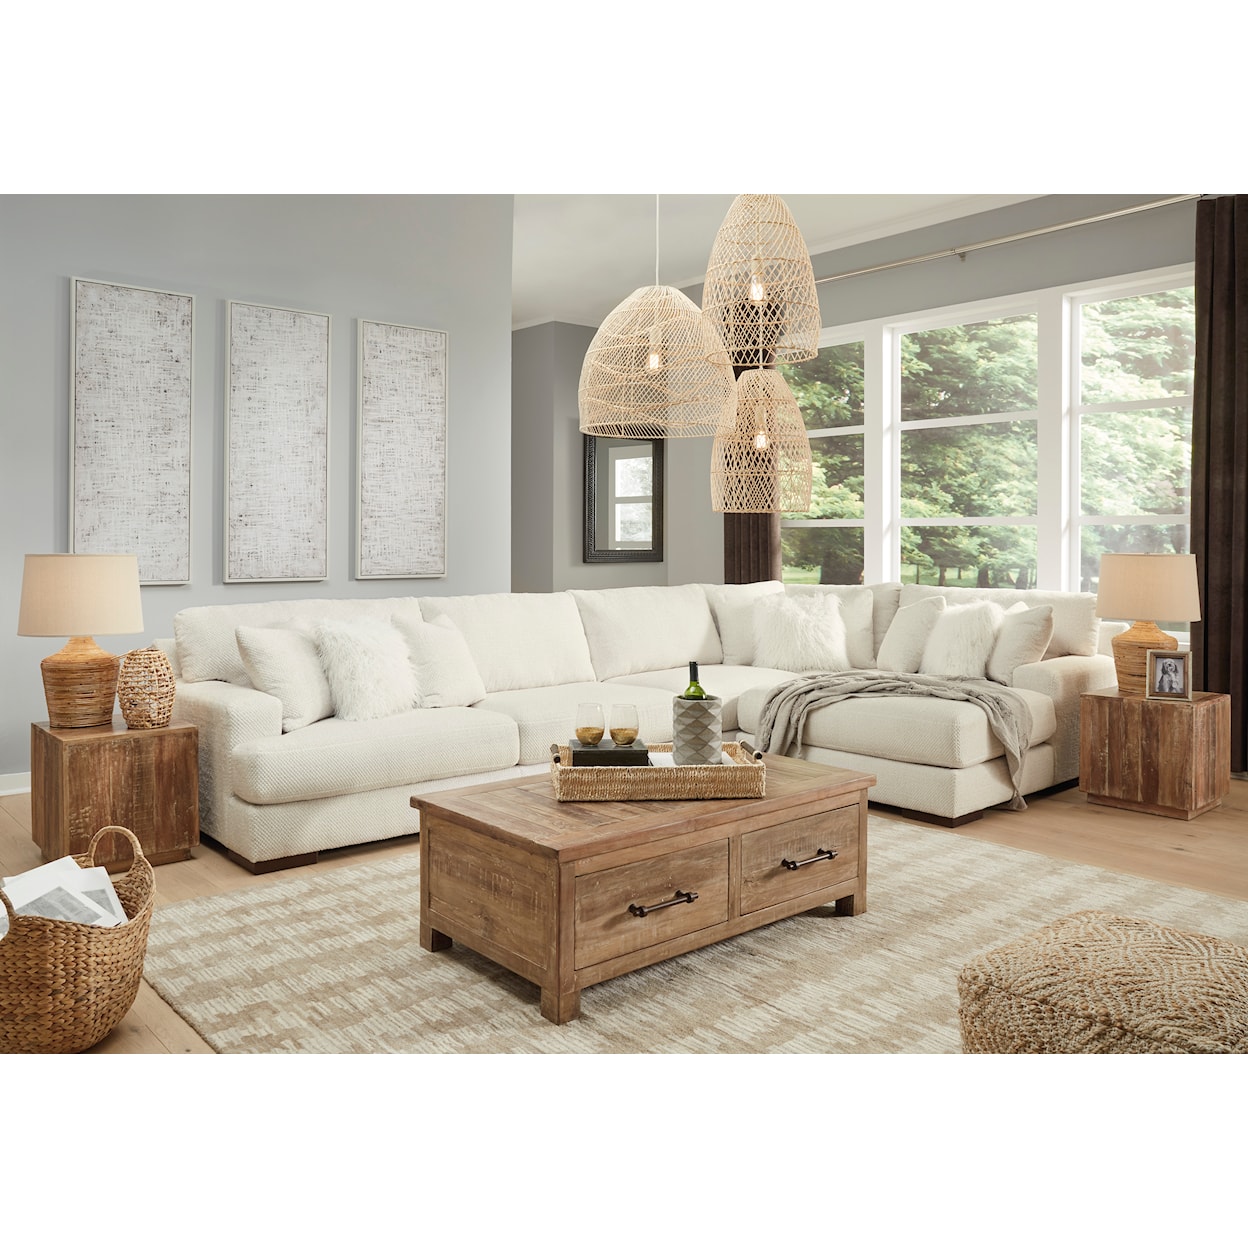 Signature Design by Ashley Zada 4-Piece Sectional with Chaise